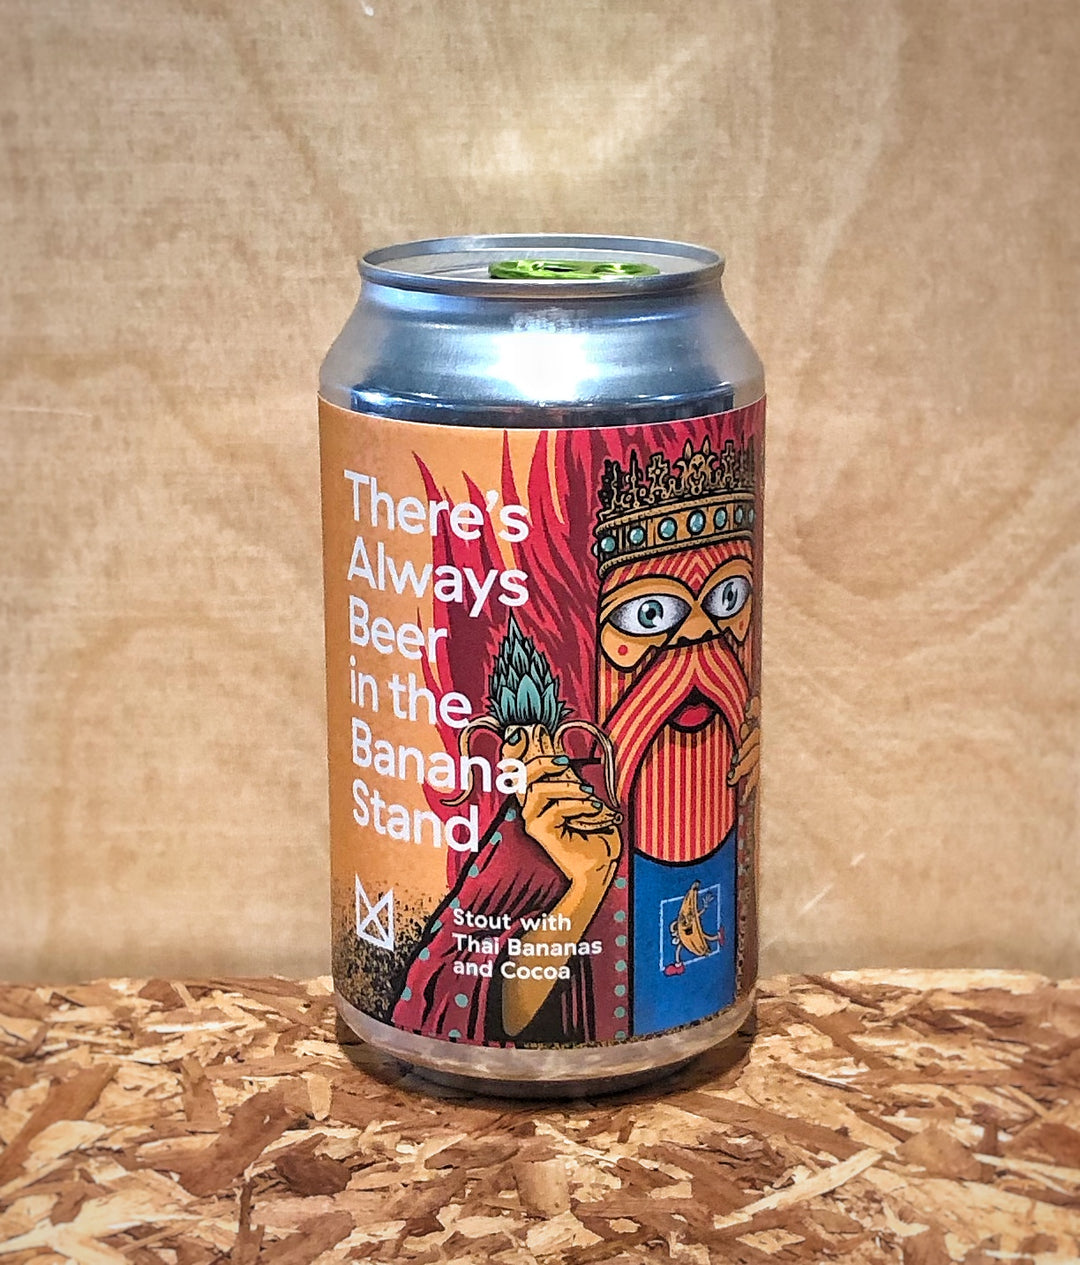 Marz Community Brewing 'There's Always Beer in the Banana Stand' Stout with Thai Bananas & Coconut (Chicago, IL)